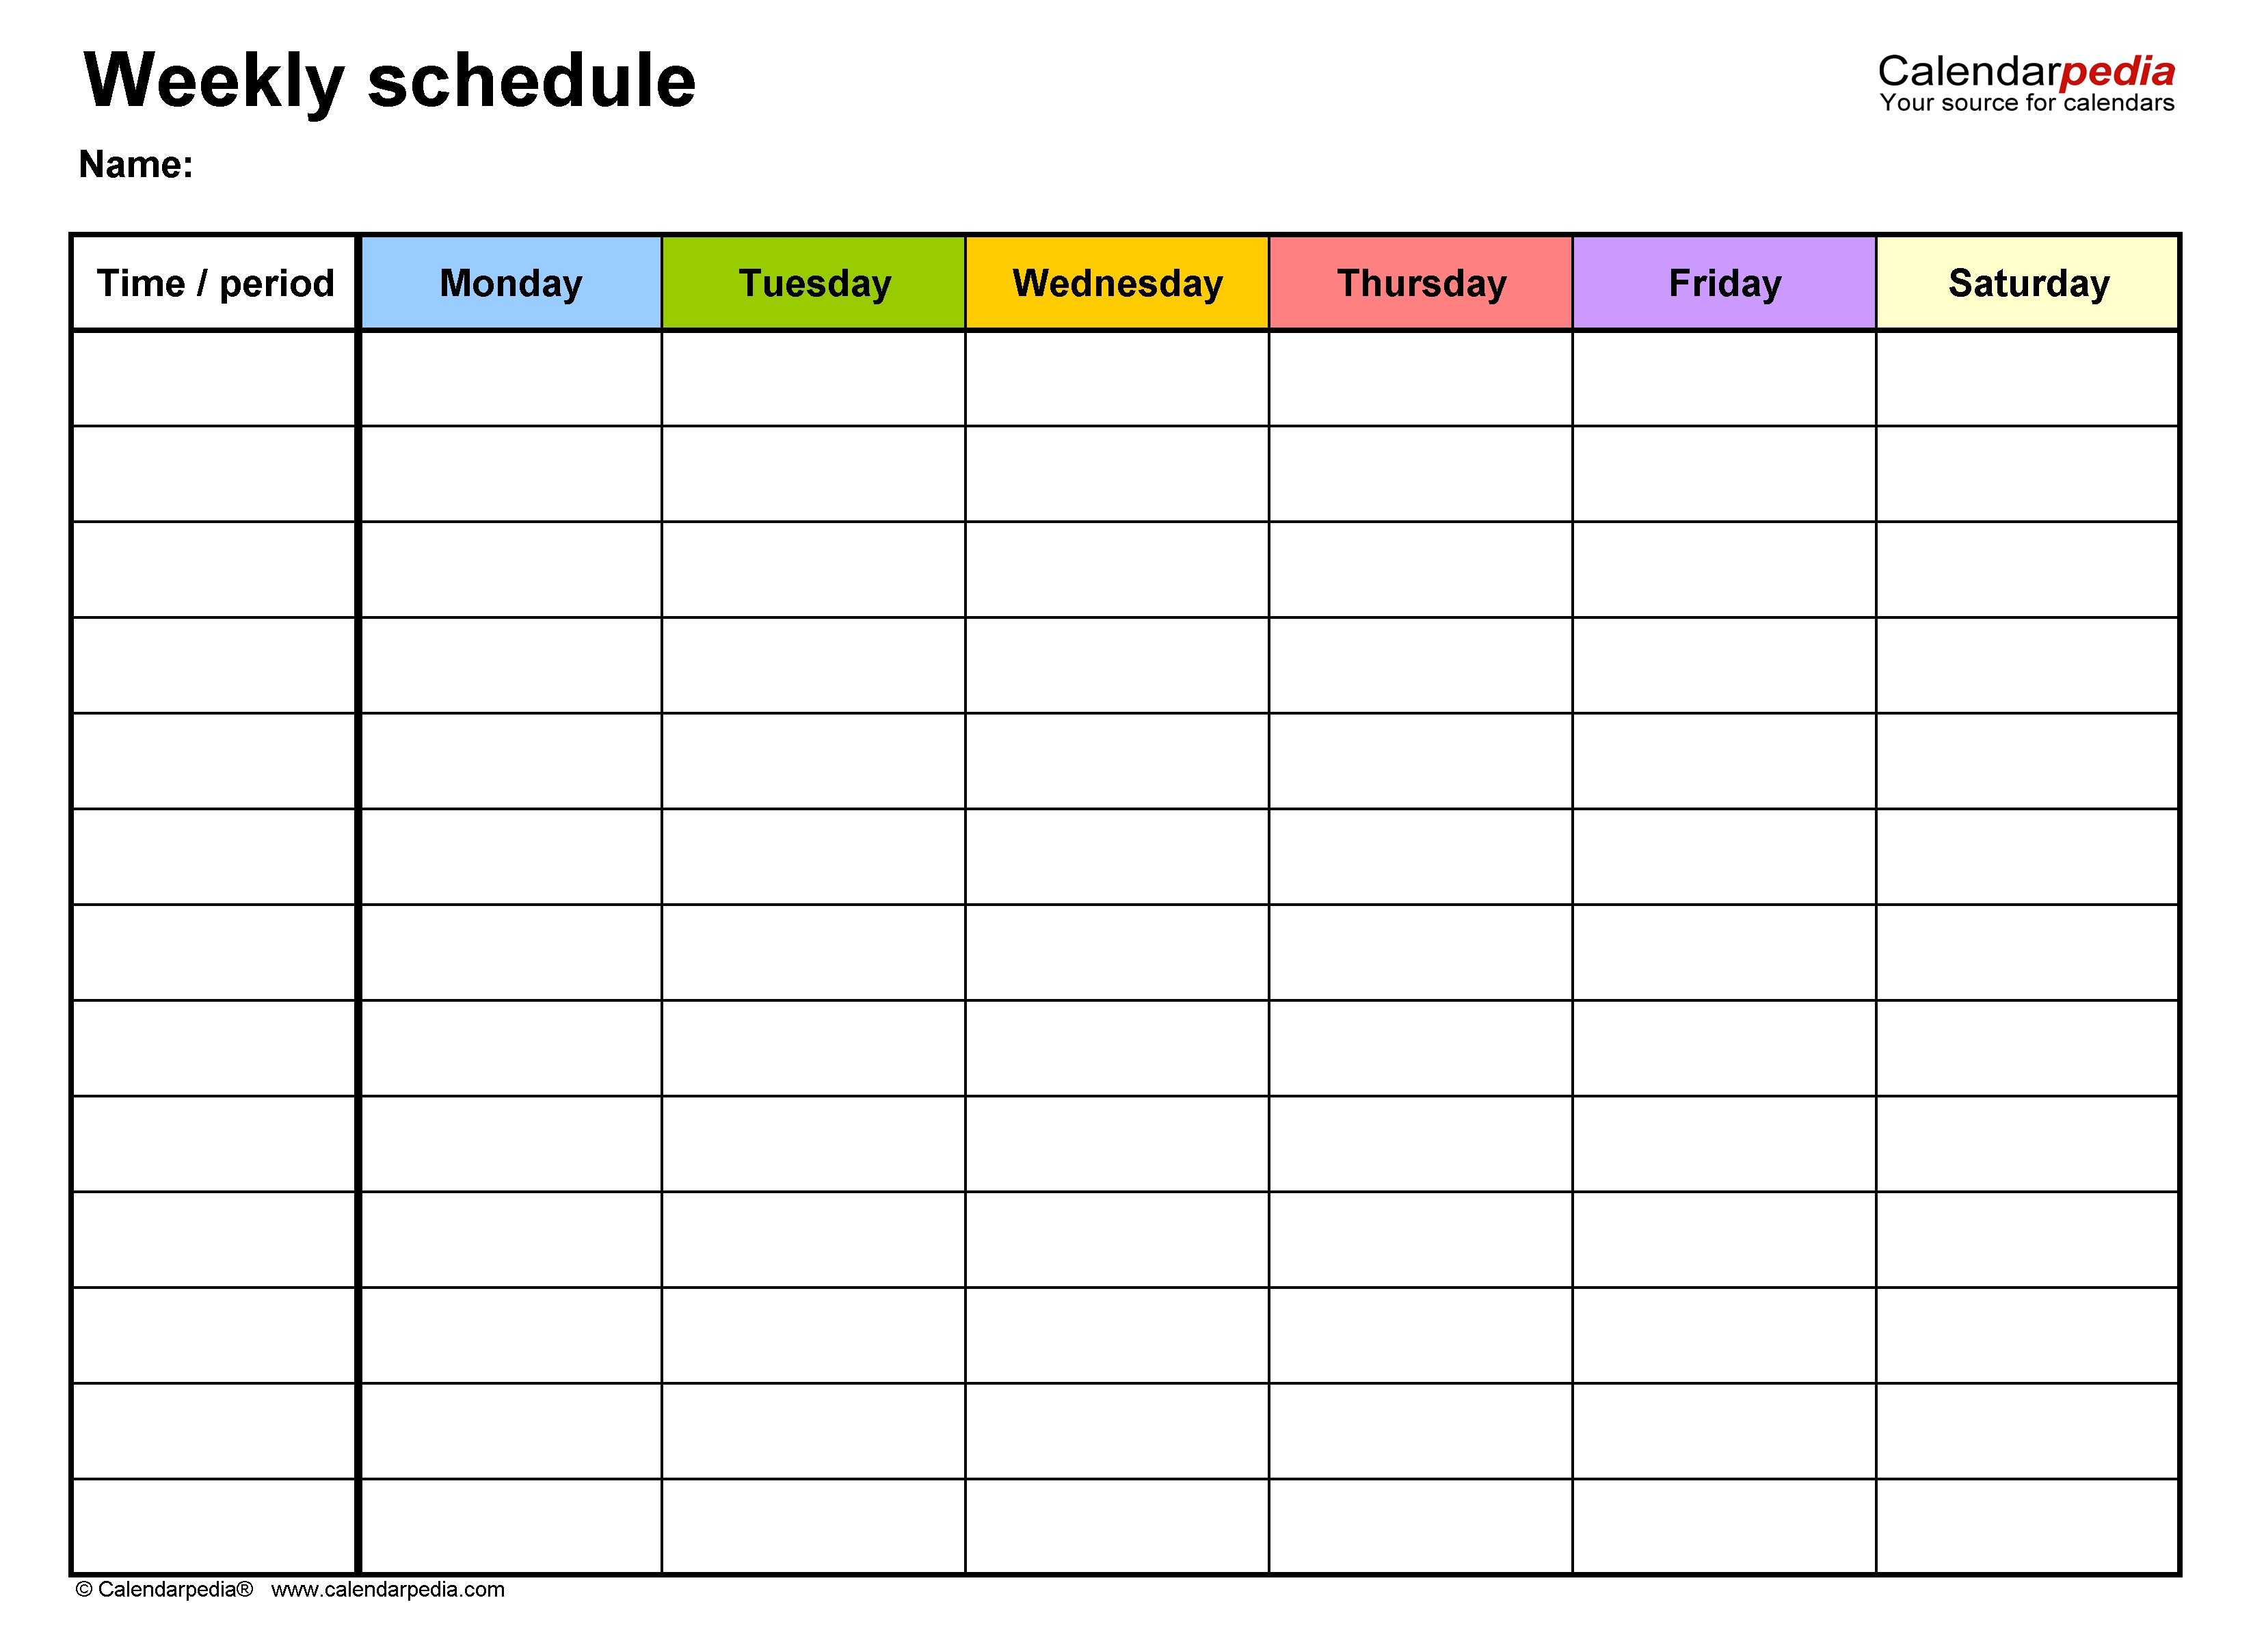 Create A Daily Schedule In Excel Lopezcube